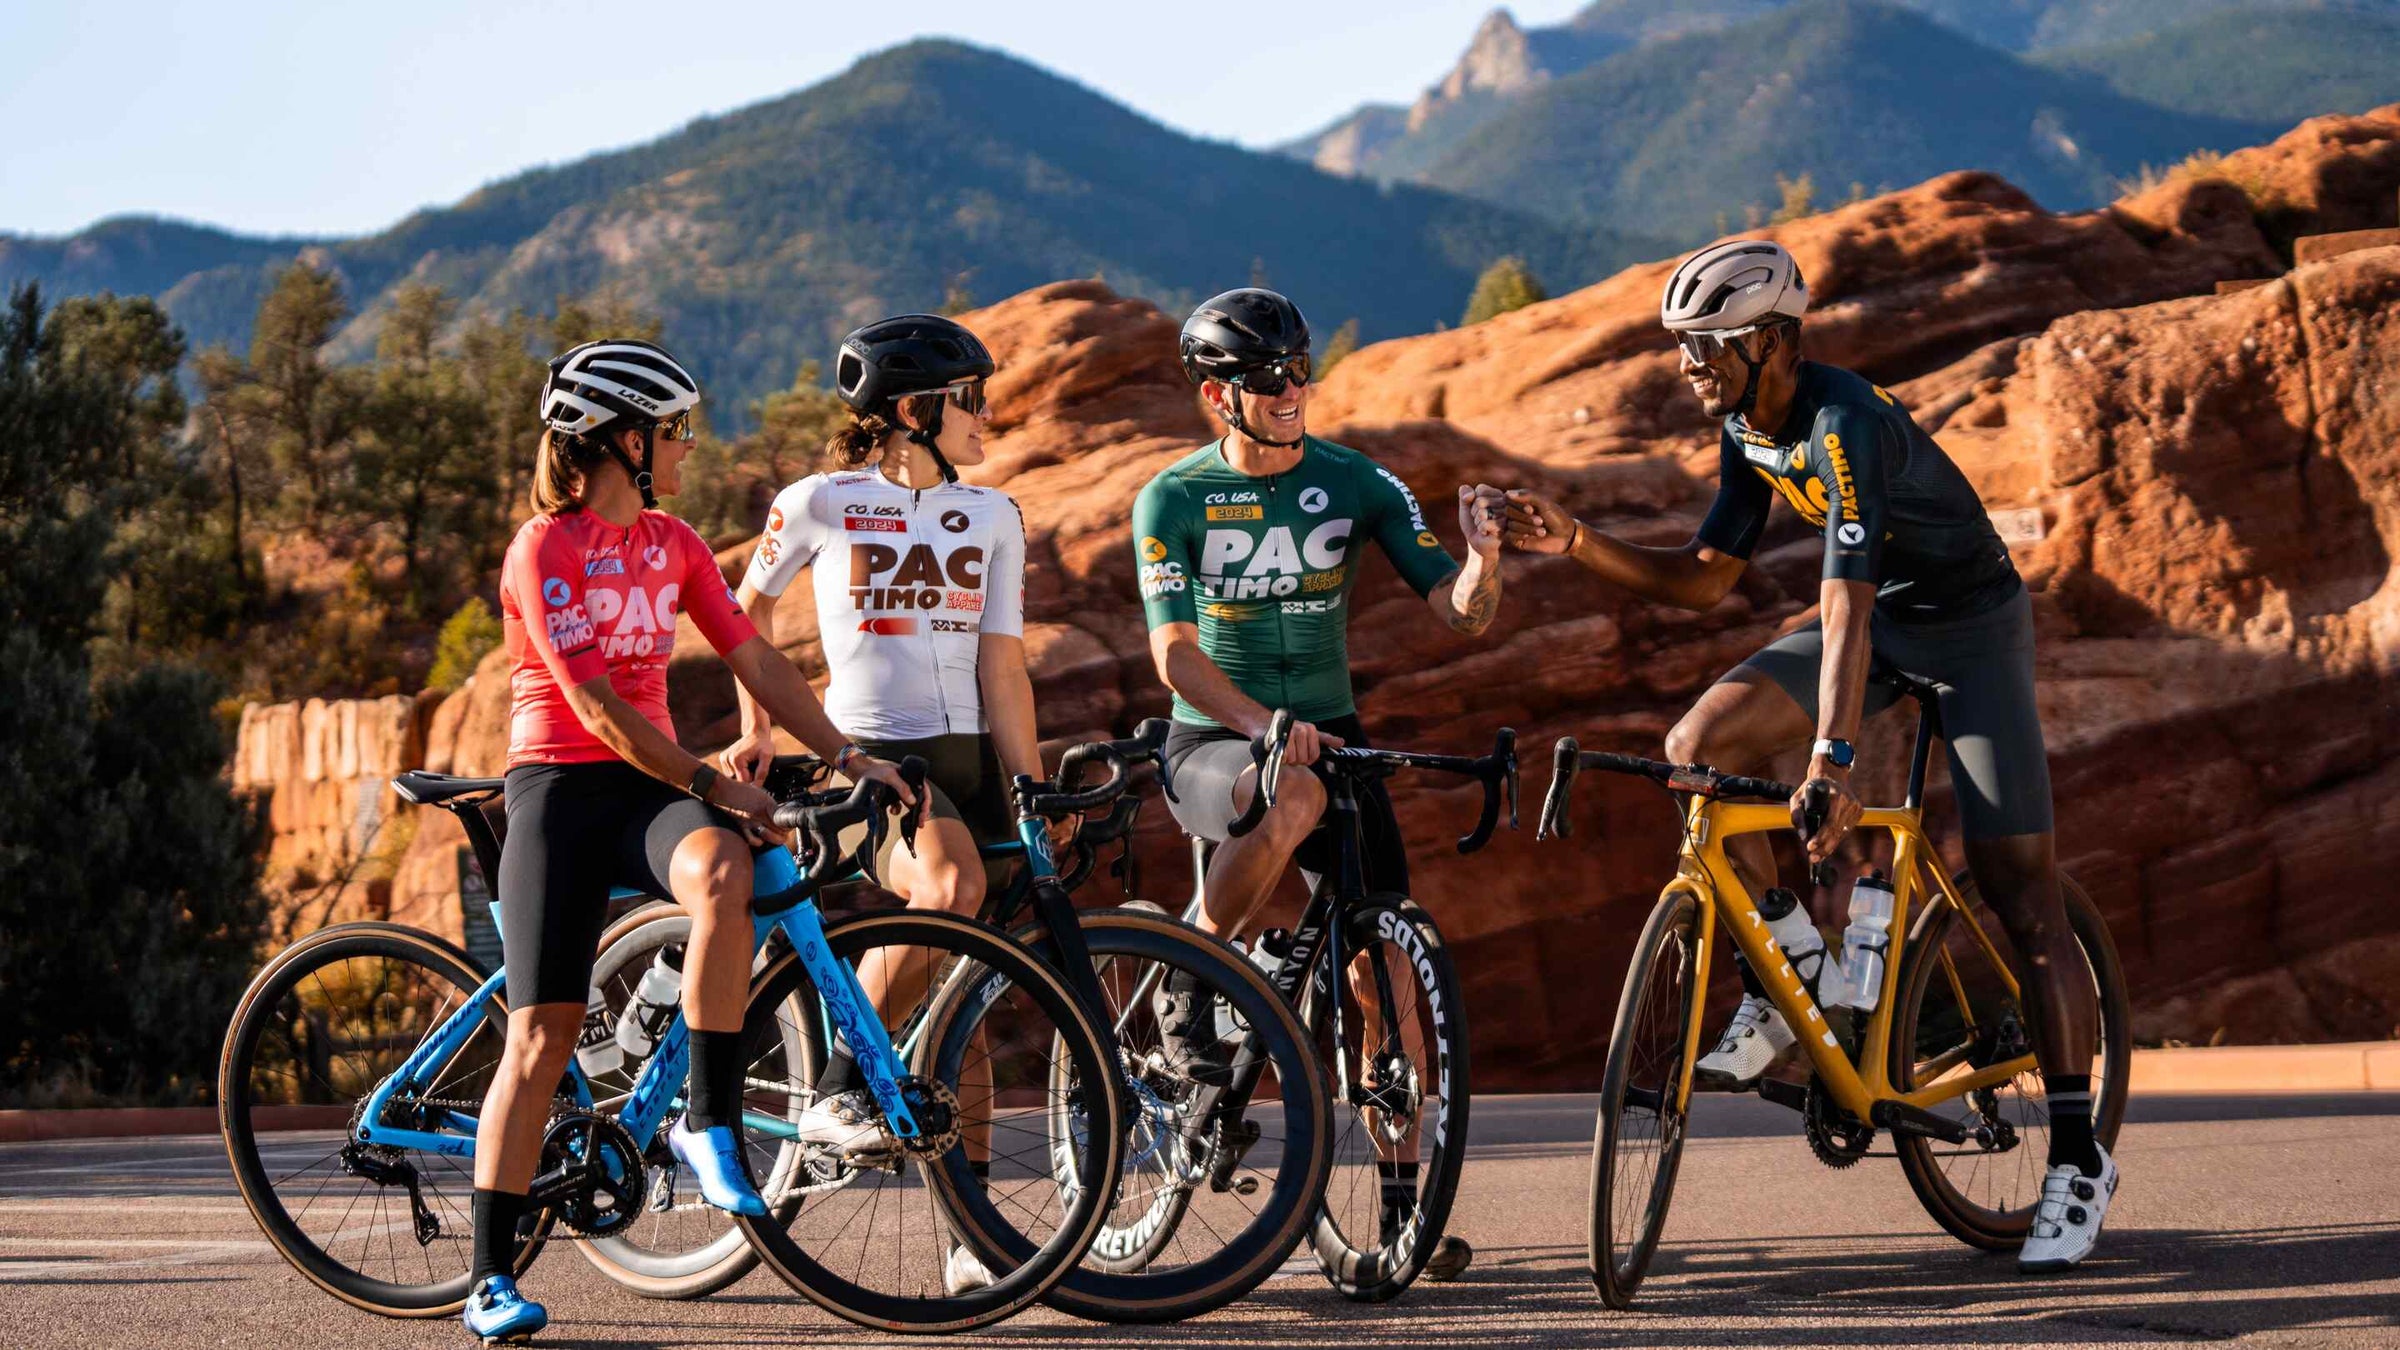 Pactimo's Spring Cycling Clothing Collection for Men